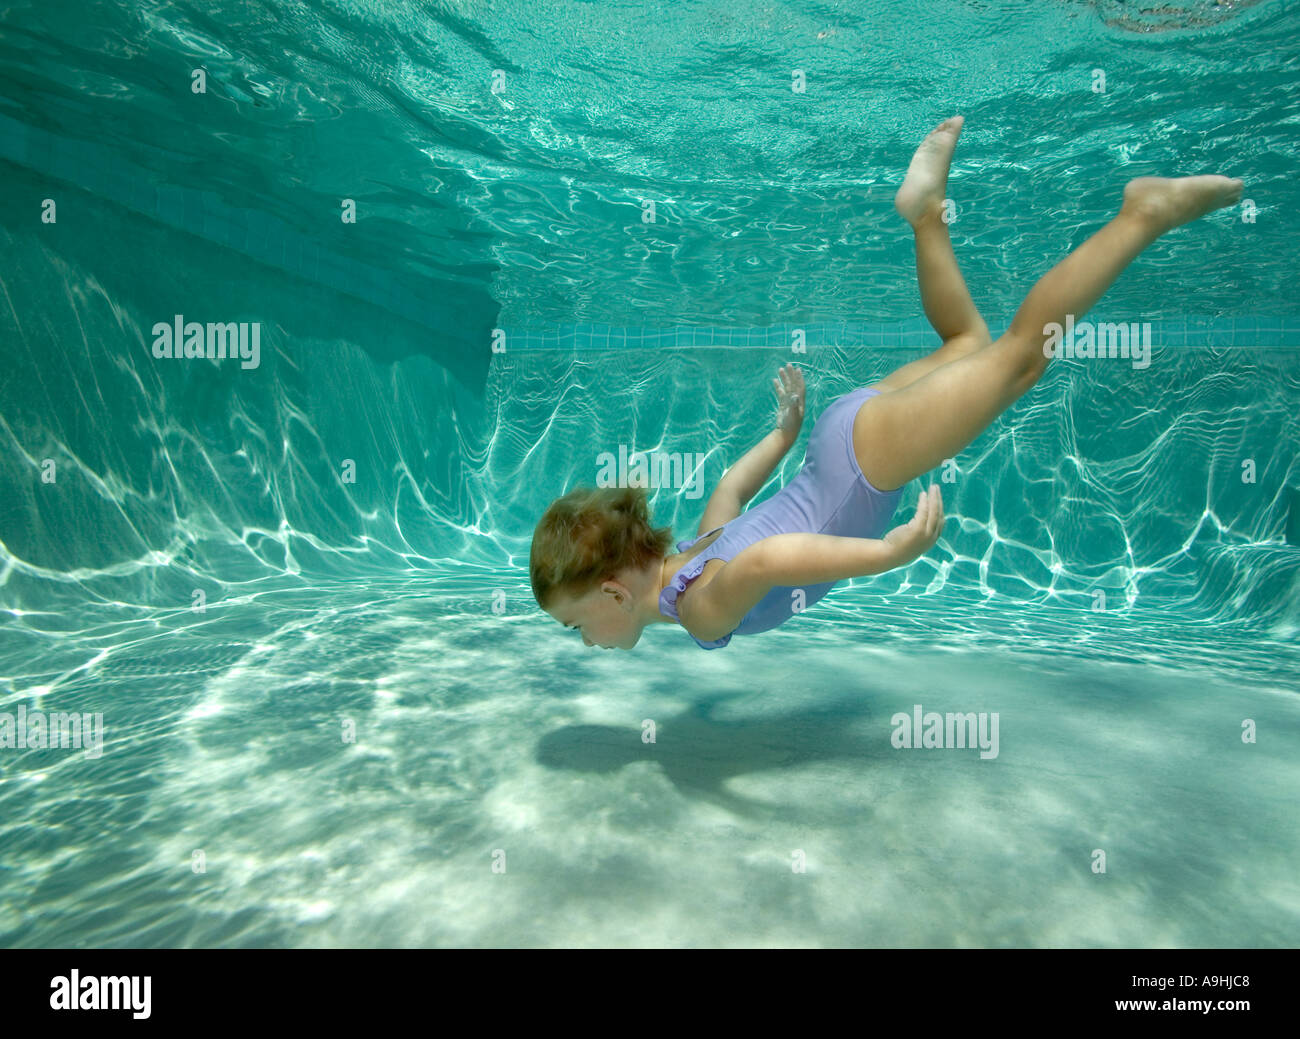 Young girl diving underwater in pool Stock Photo